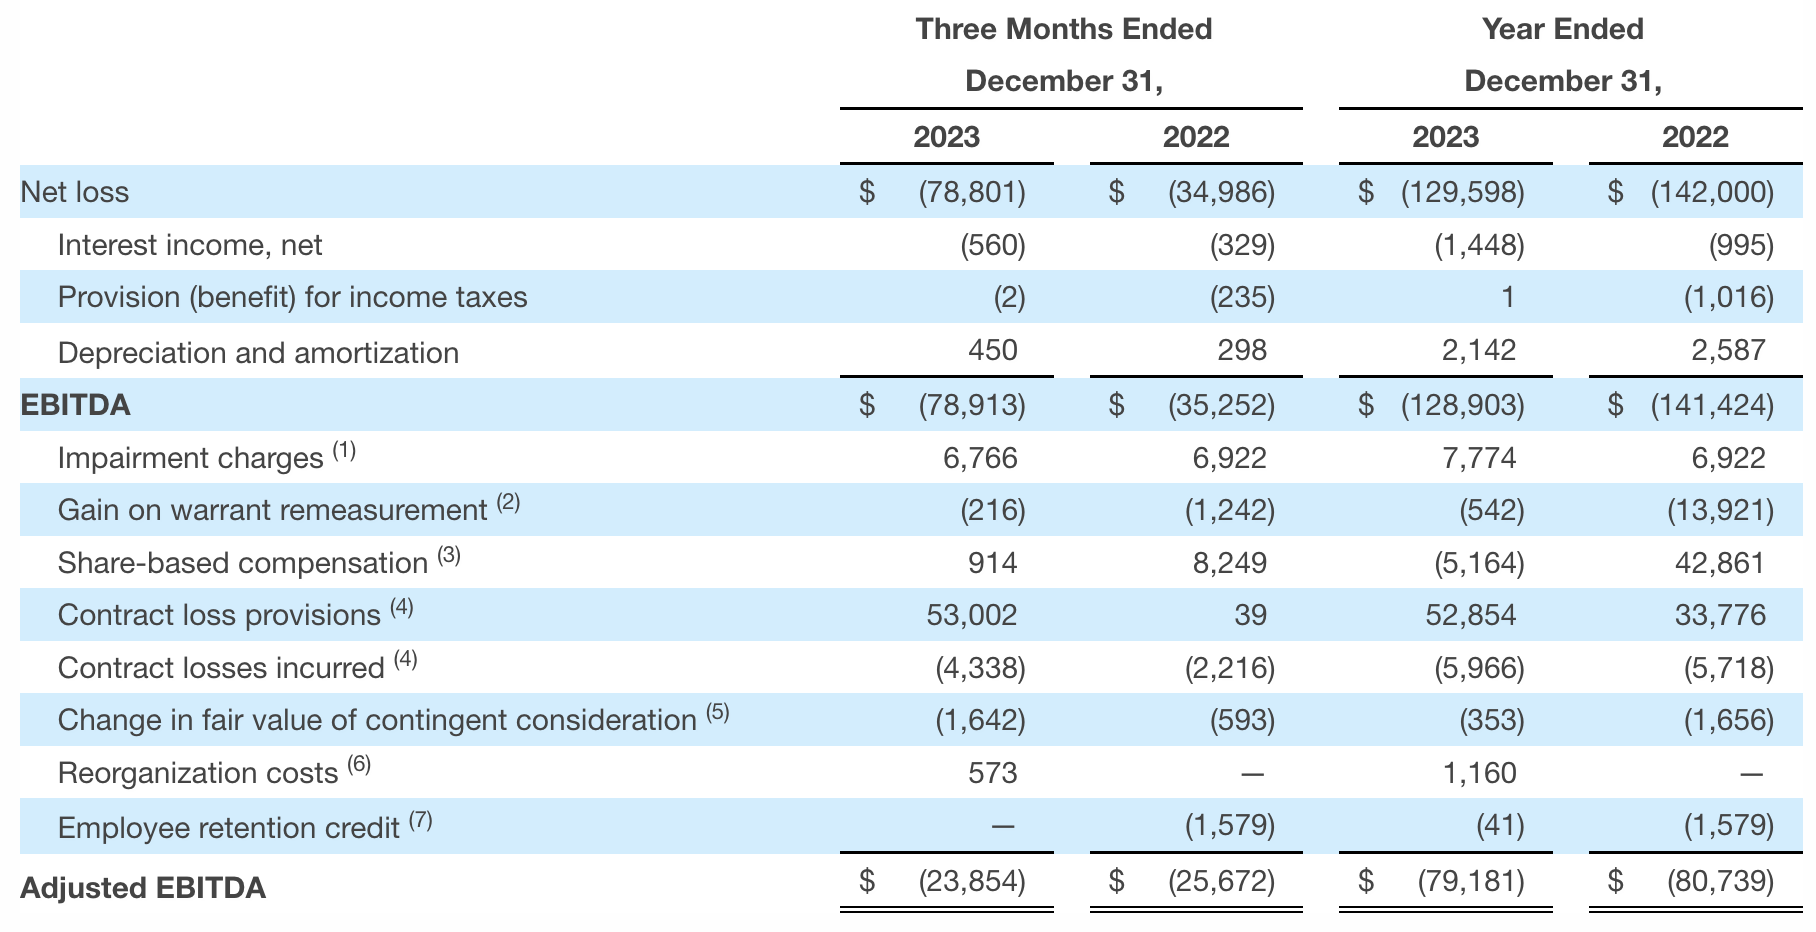 Reconciliation of Net Loss to EBITDA and Adjusted EBITDA